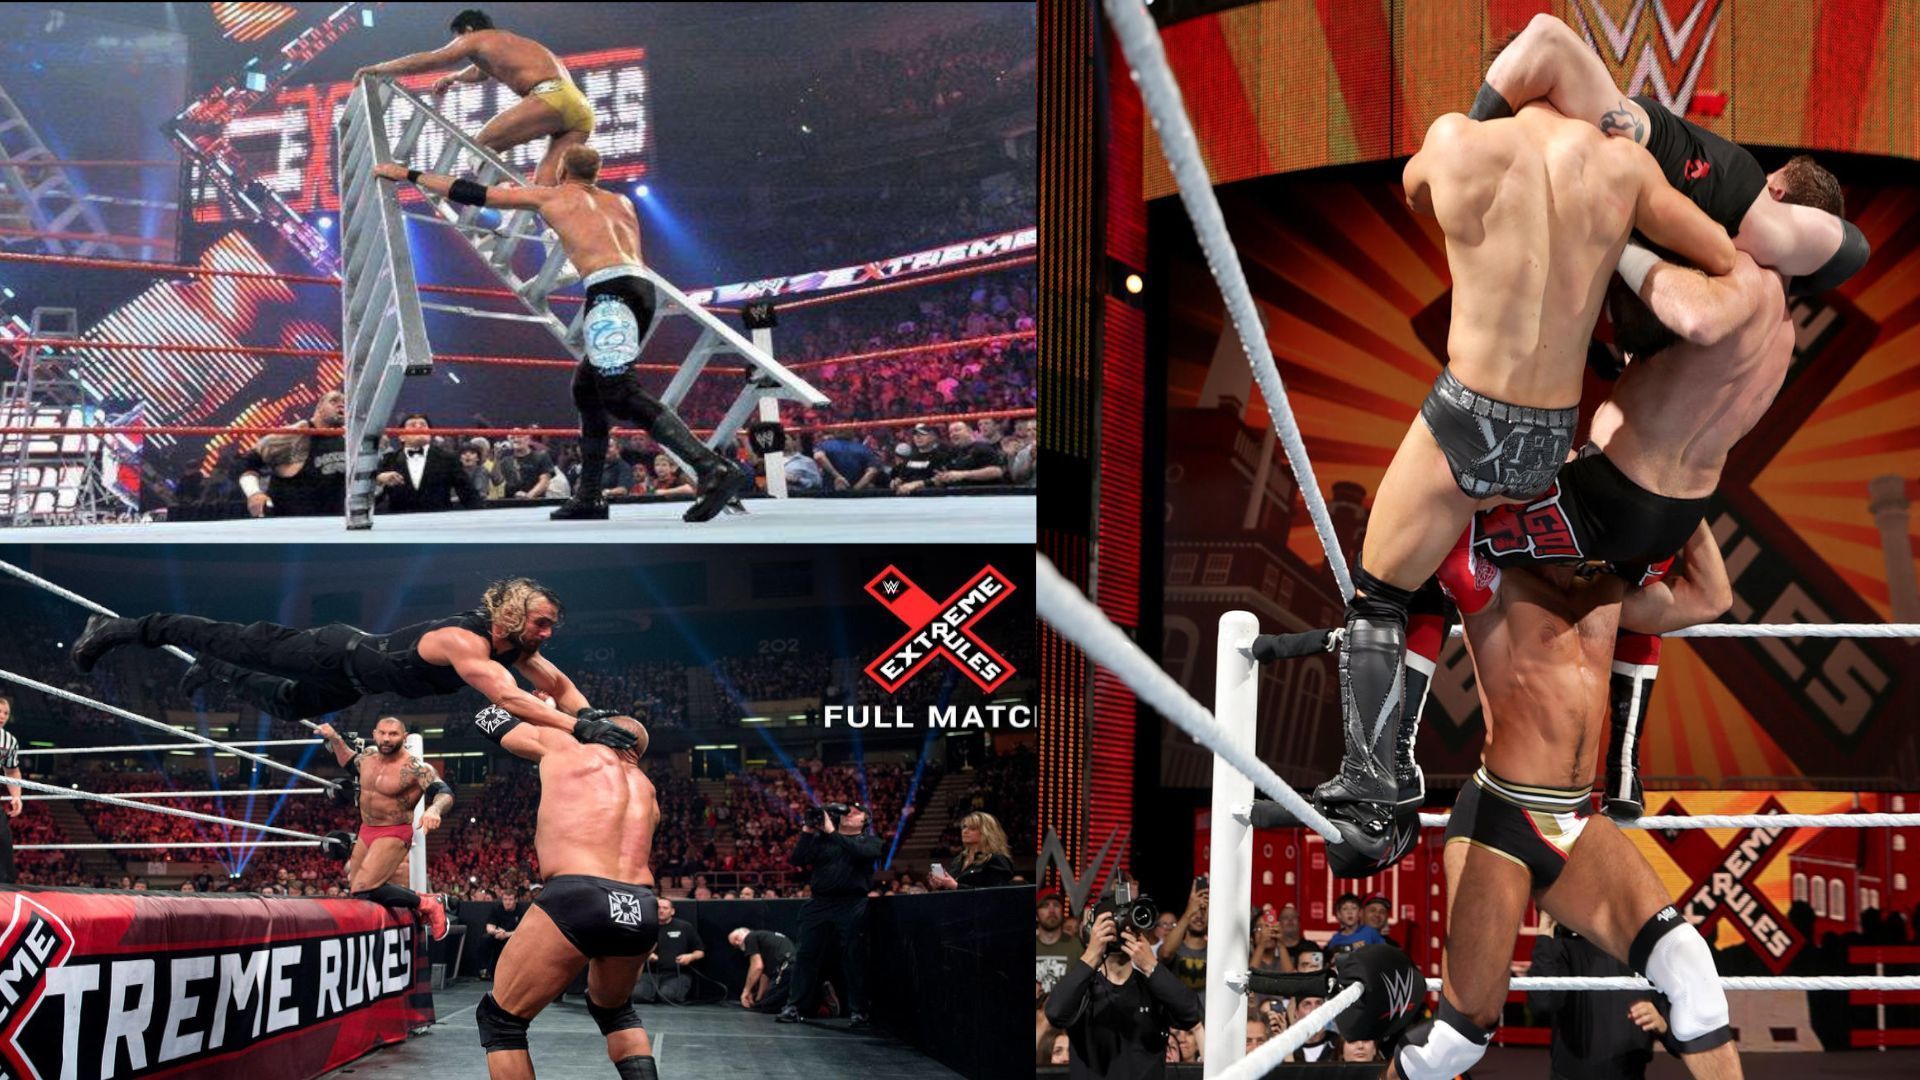 Some of the best matches in WWE history have taken place at Extreme Rules